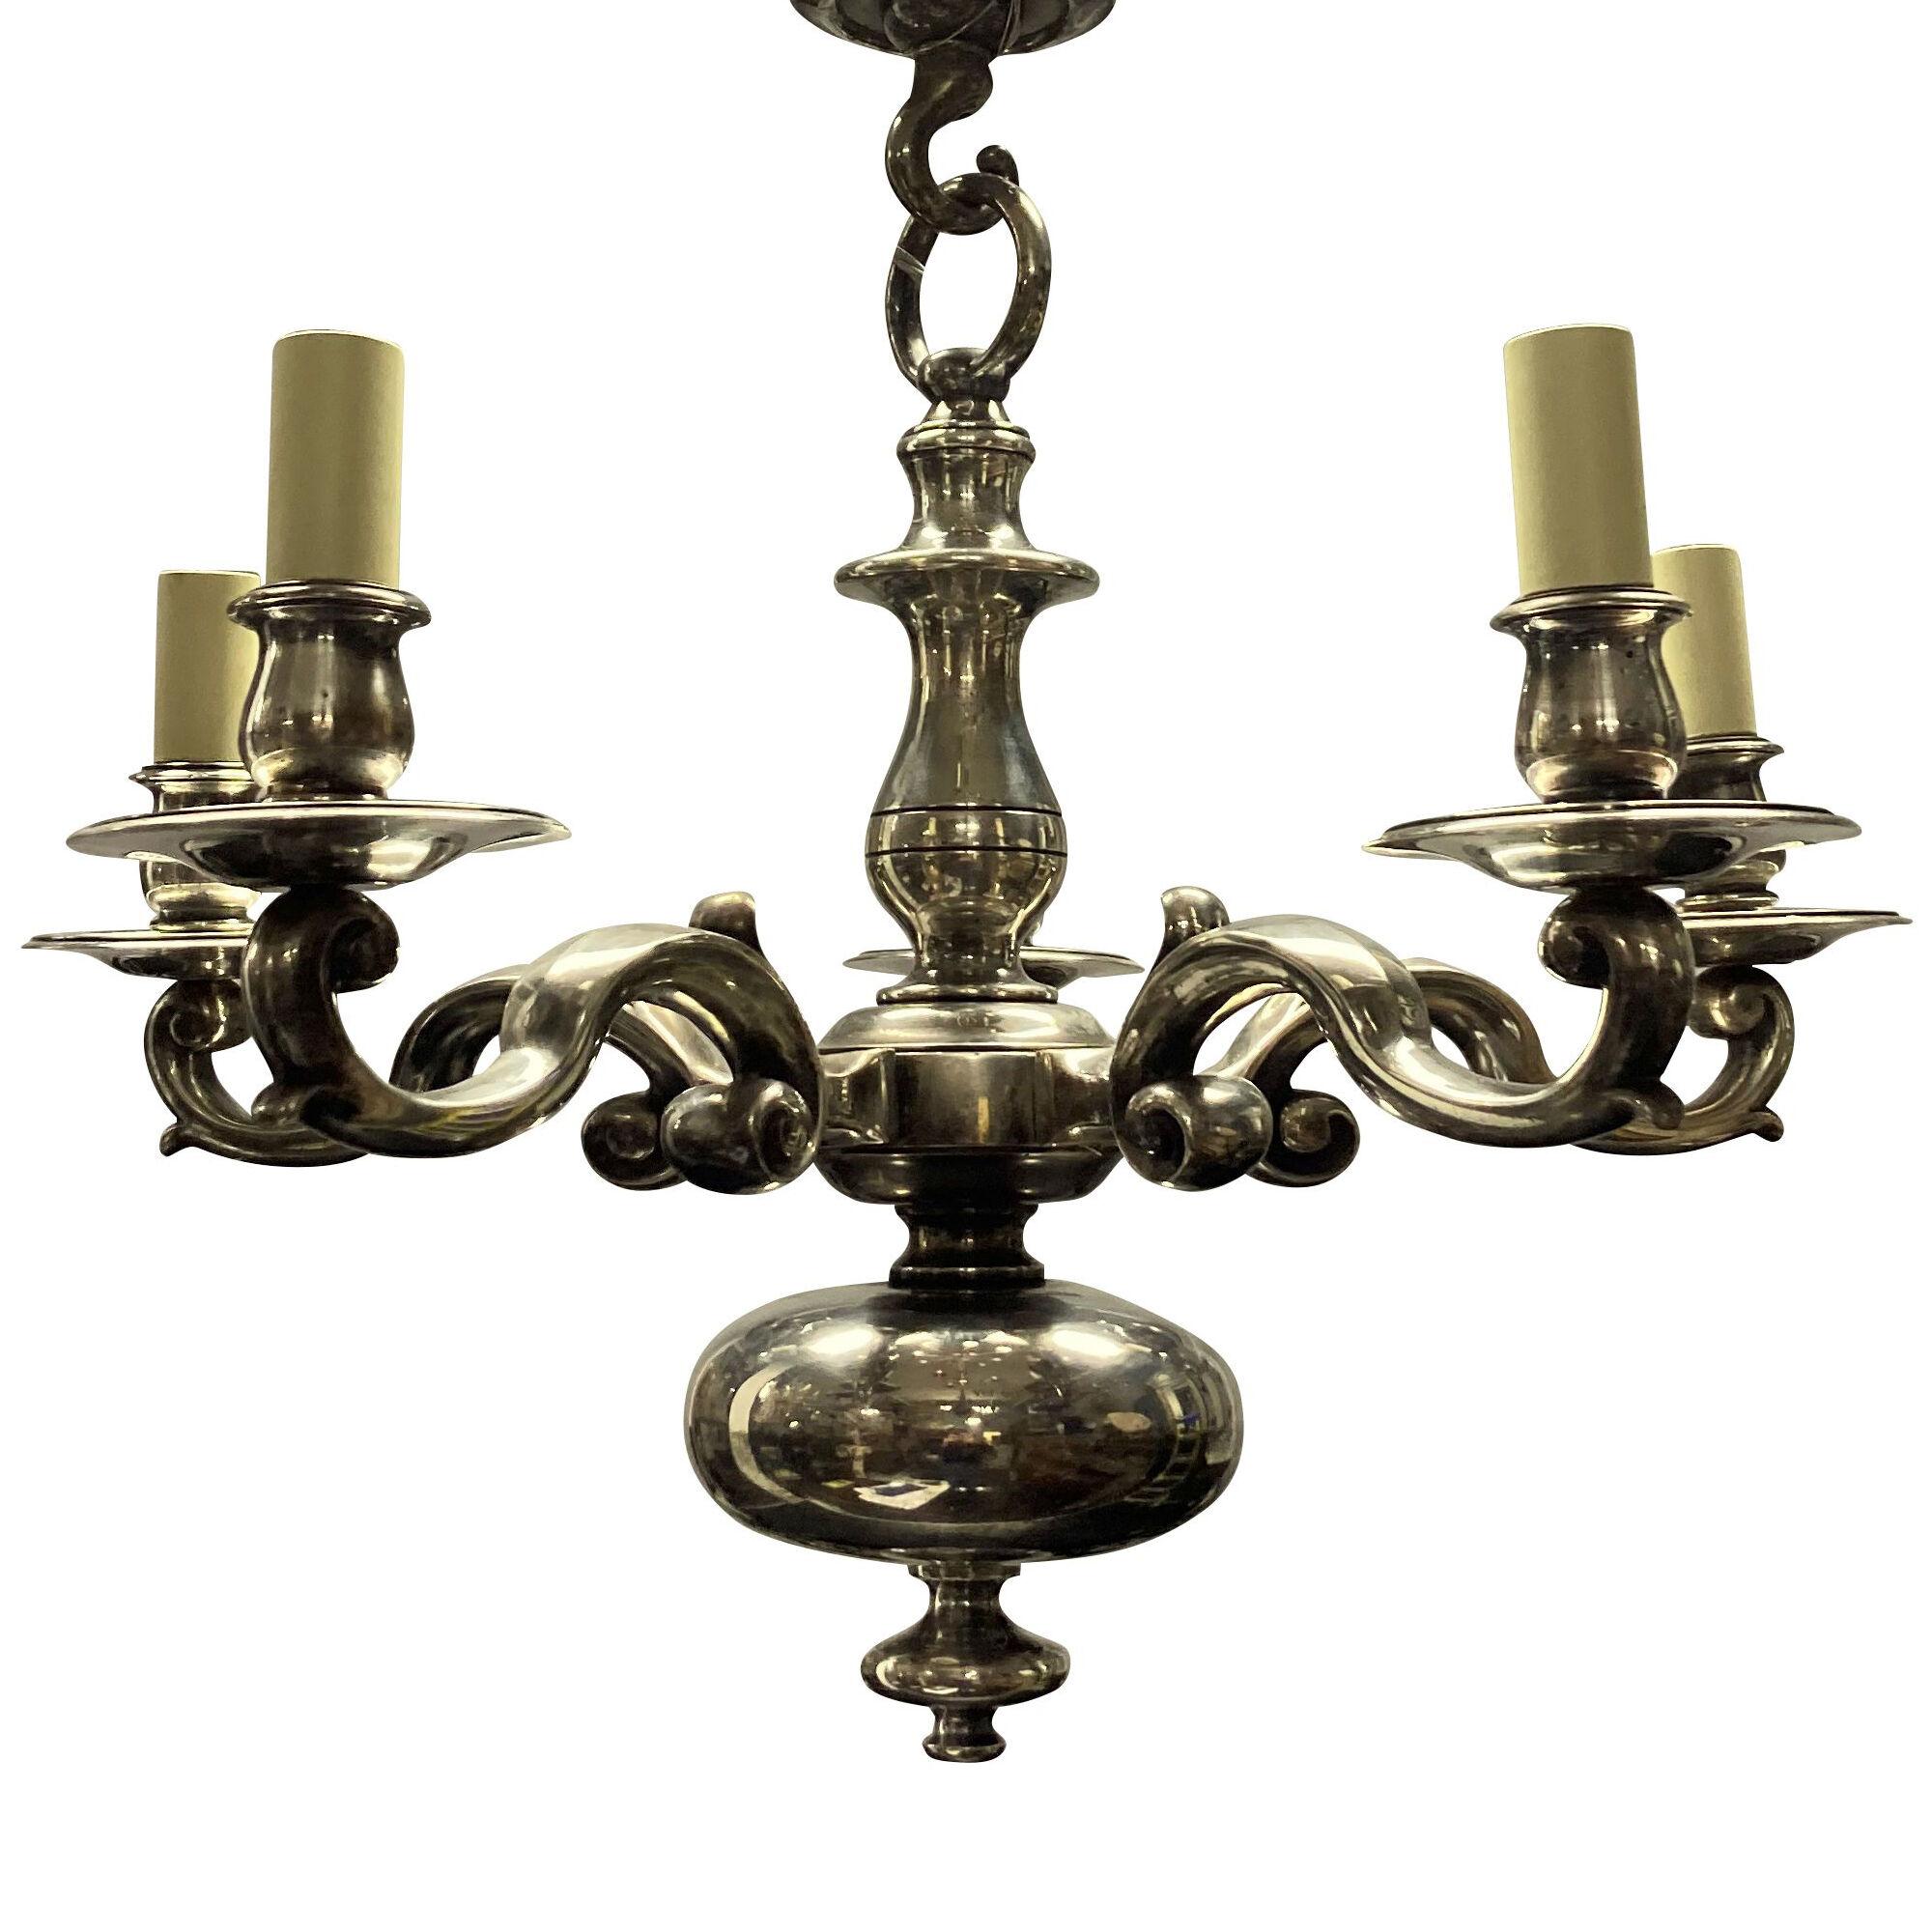 AN ENGLISH FIVE ARM, SILVER PLATED BRONZE CHANDELIER